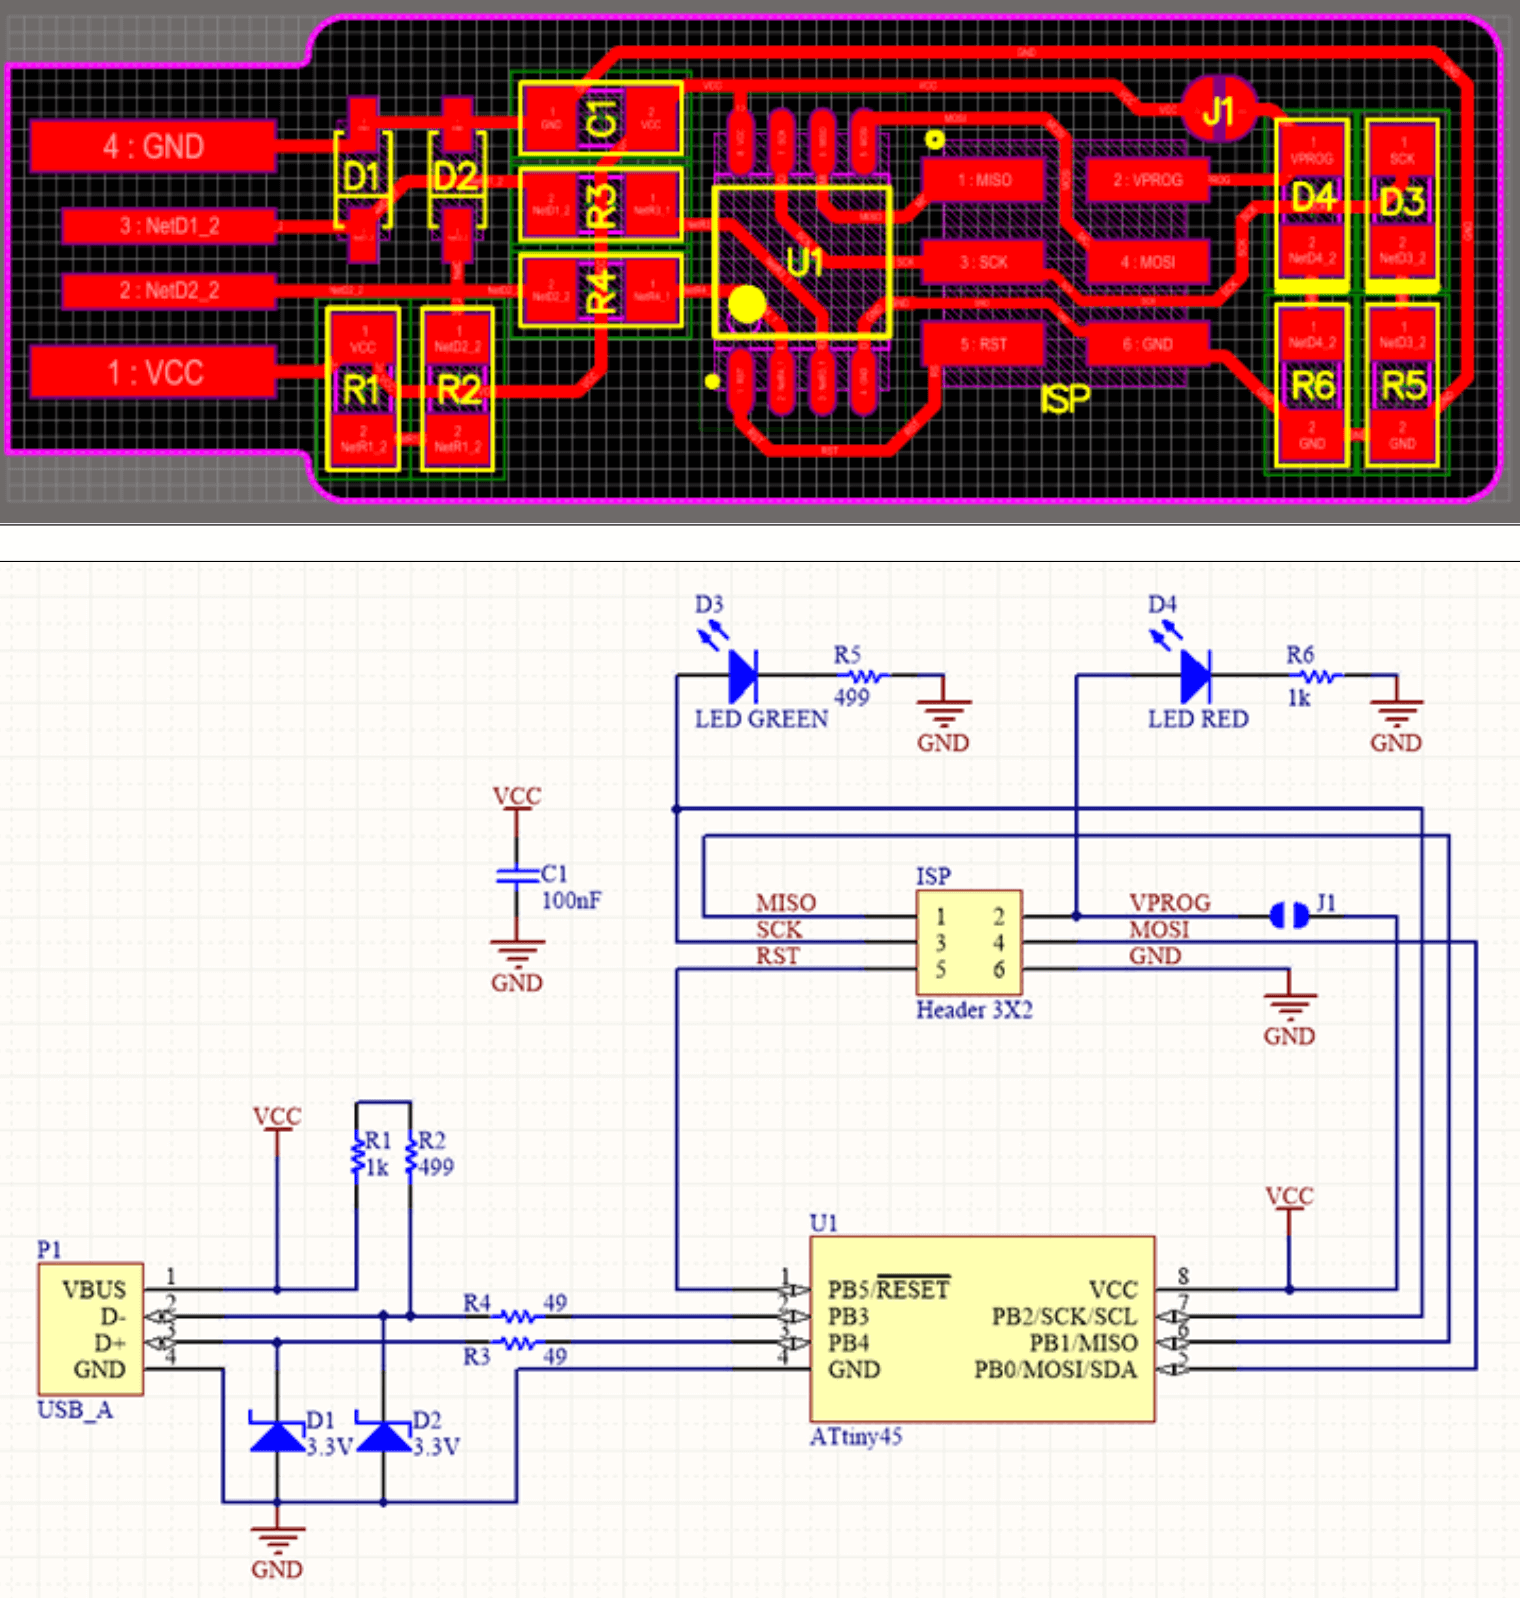 board image and schematic